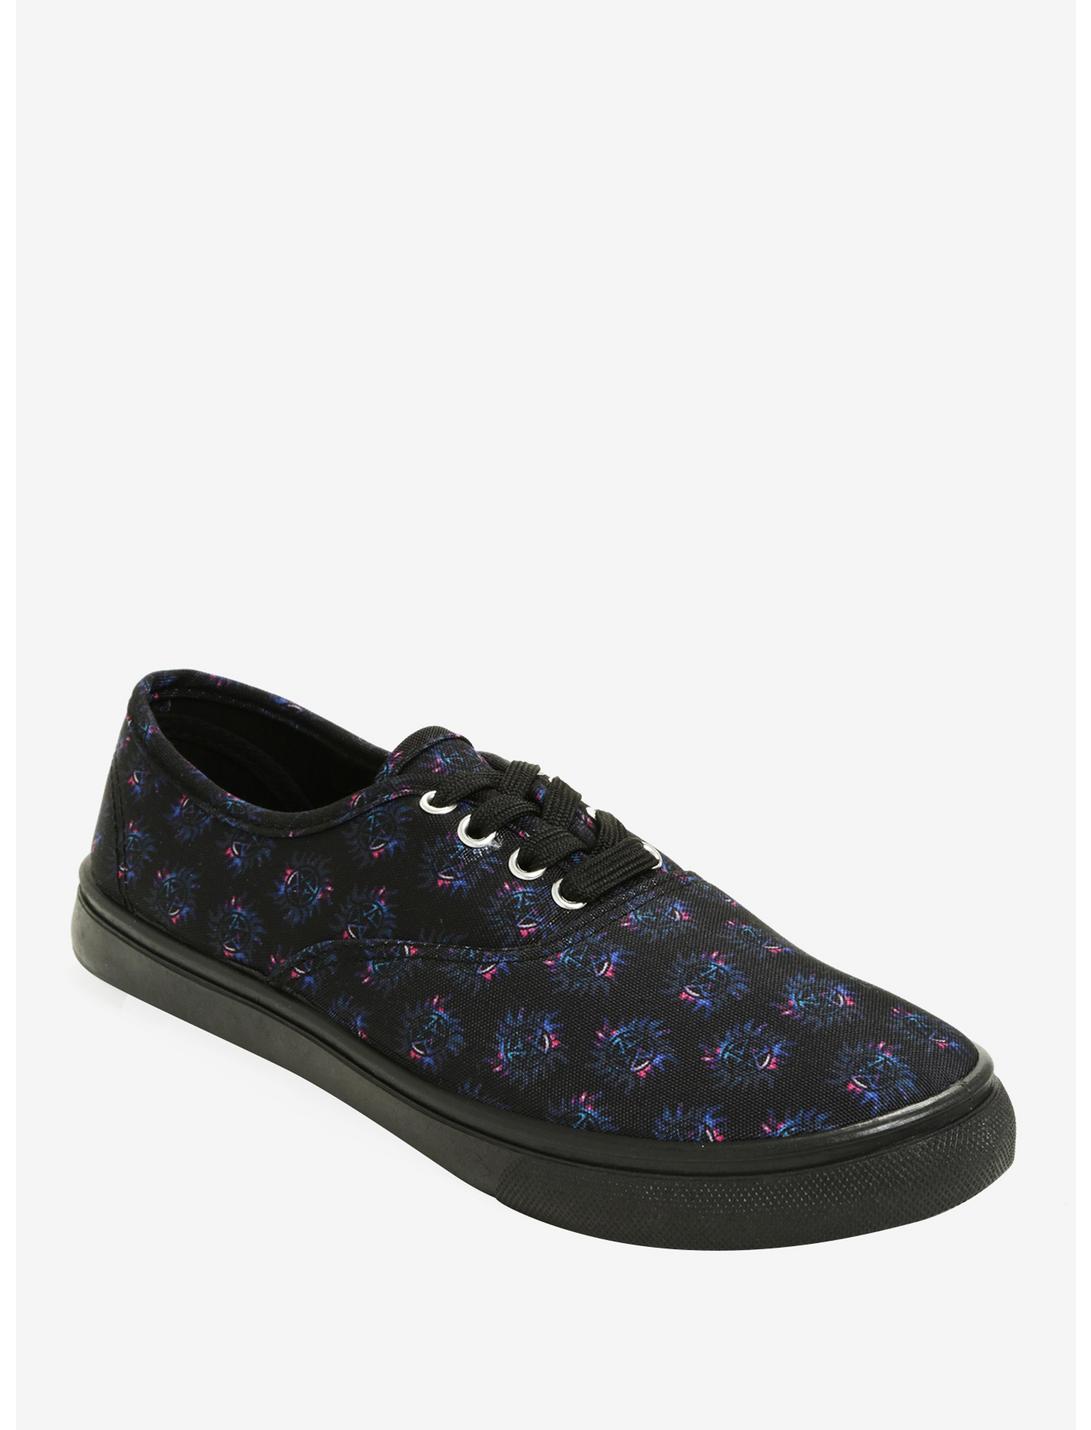 Supernatural Anti-Possession Galaxy Lace-Up Sneakers, MULTI, hi-res